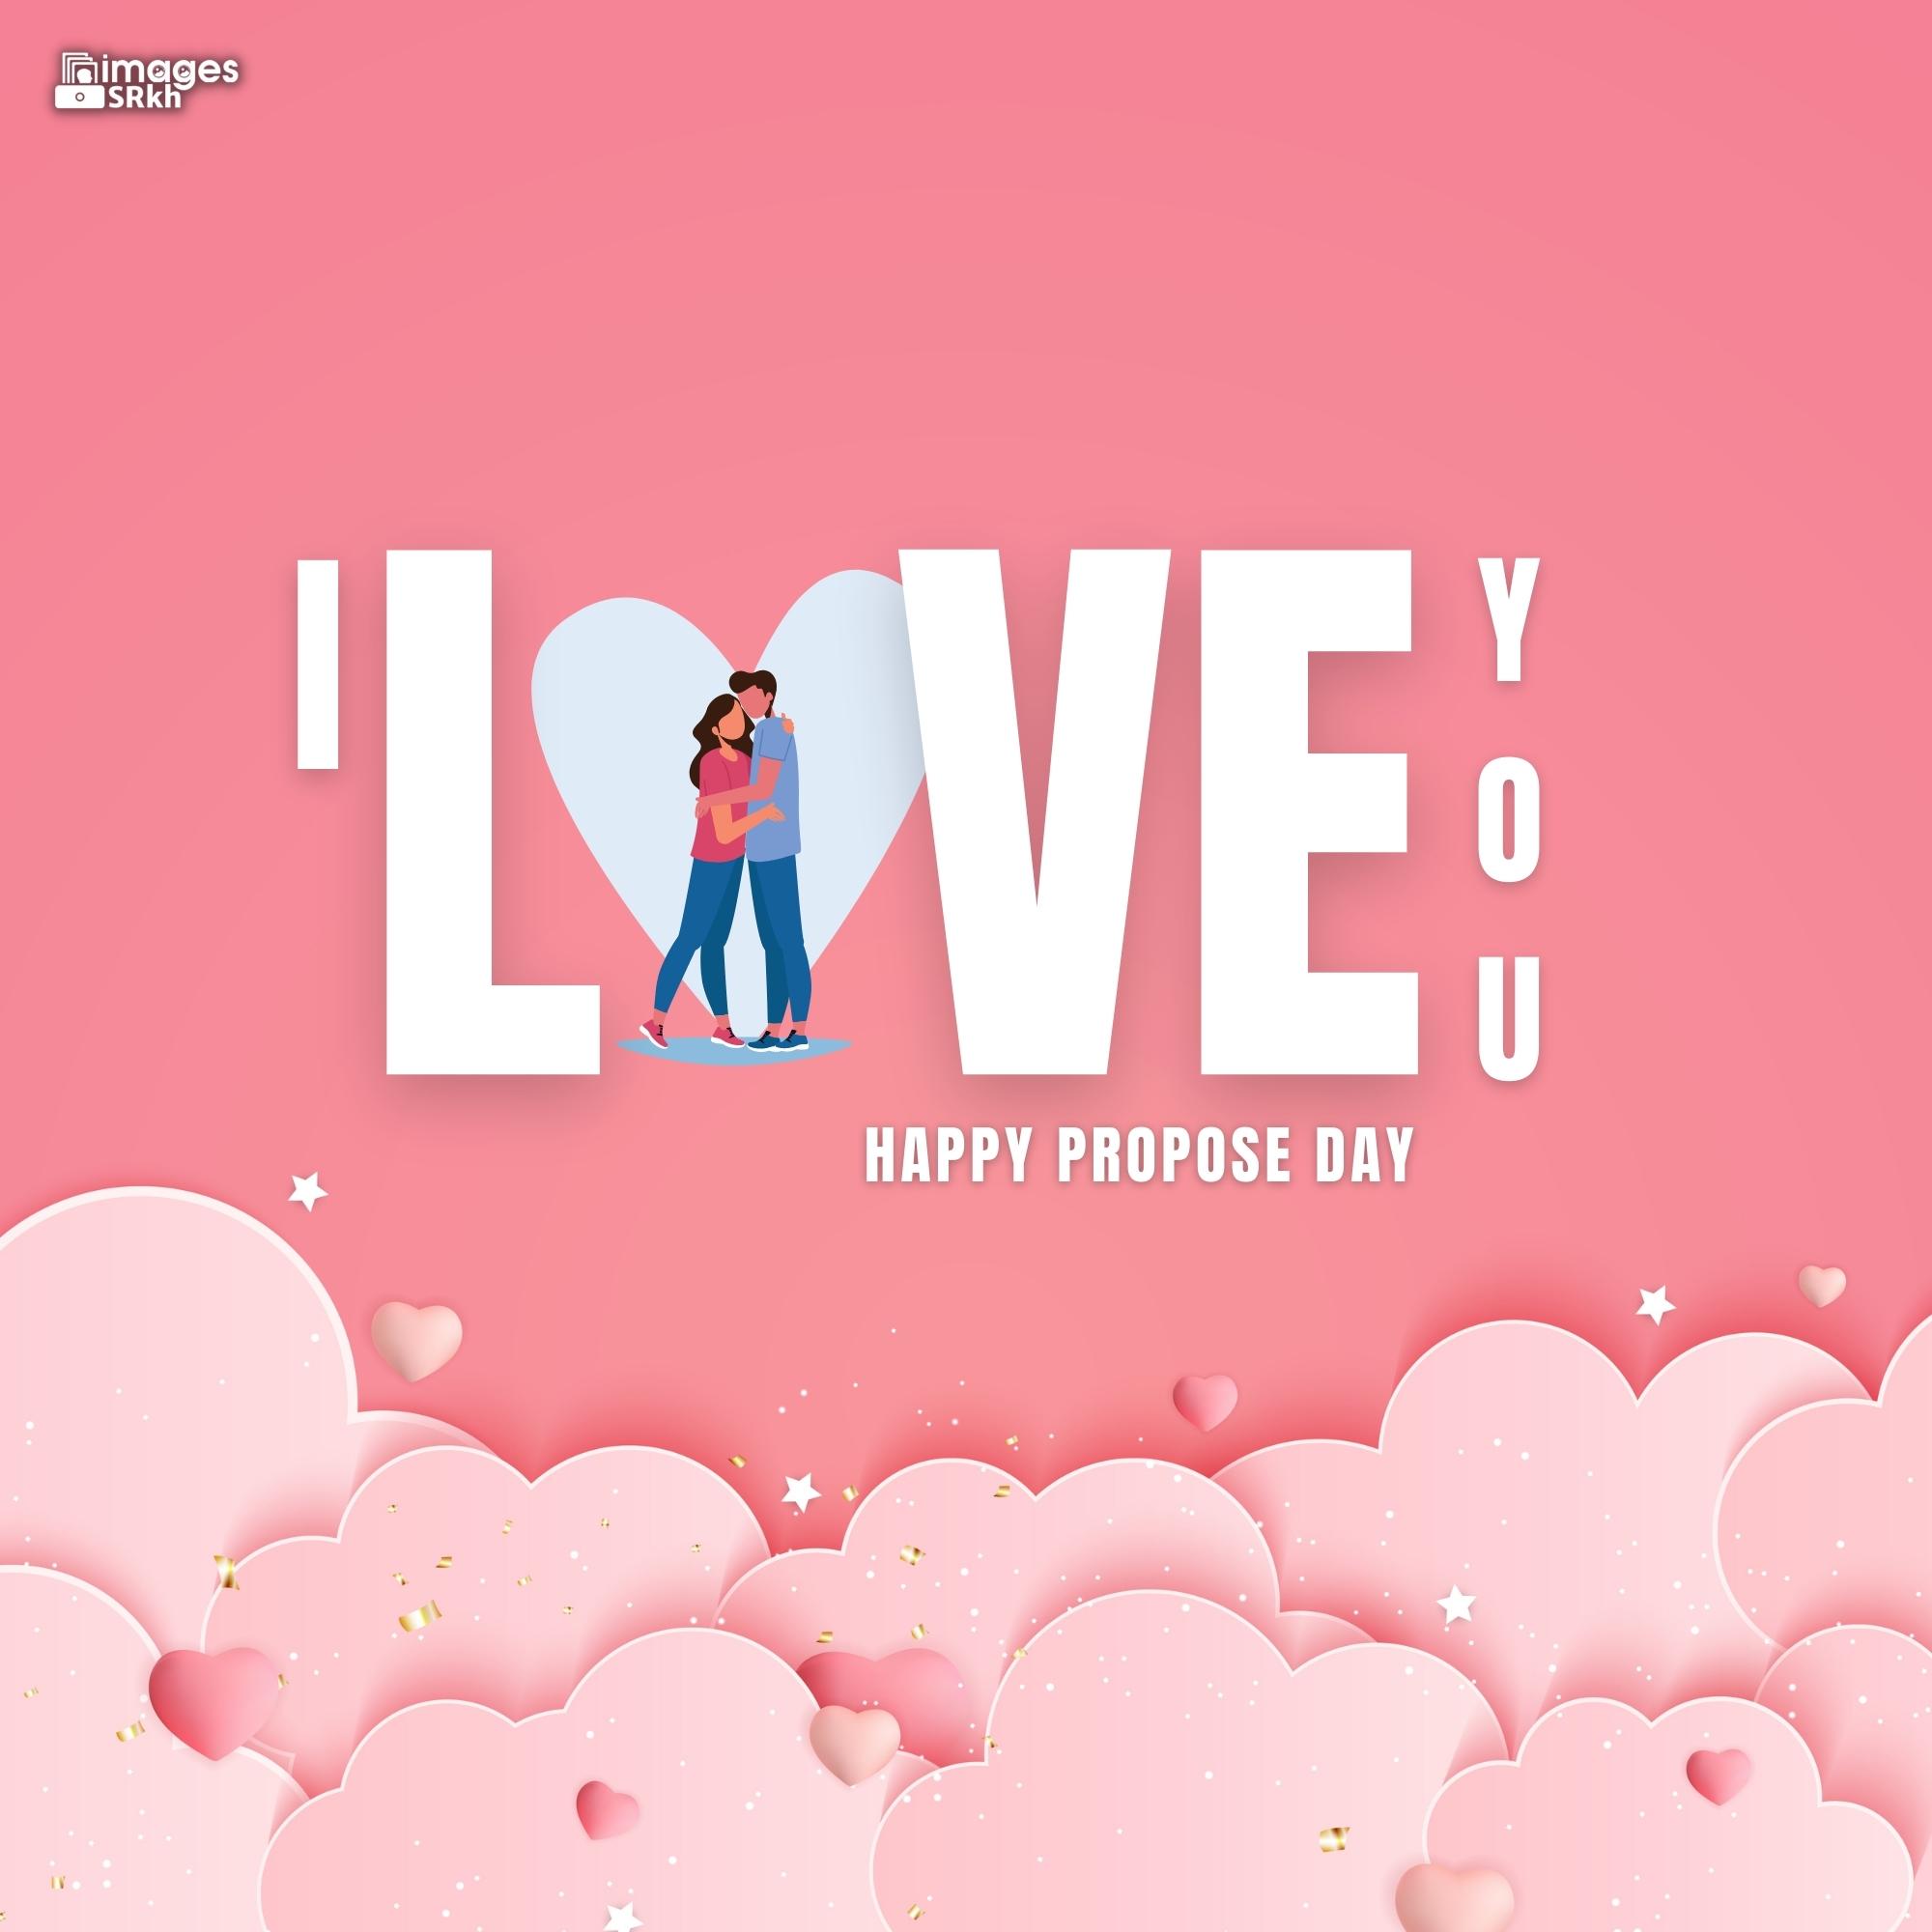 Happy Propose Day Images | 414 | I LOVE YOU